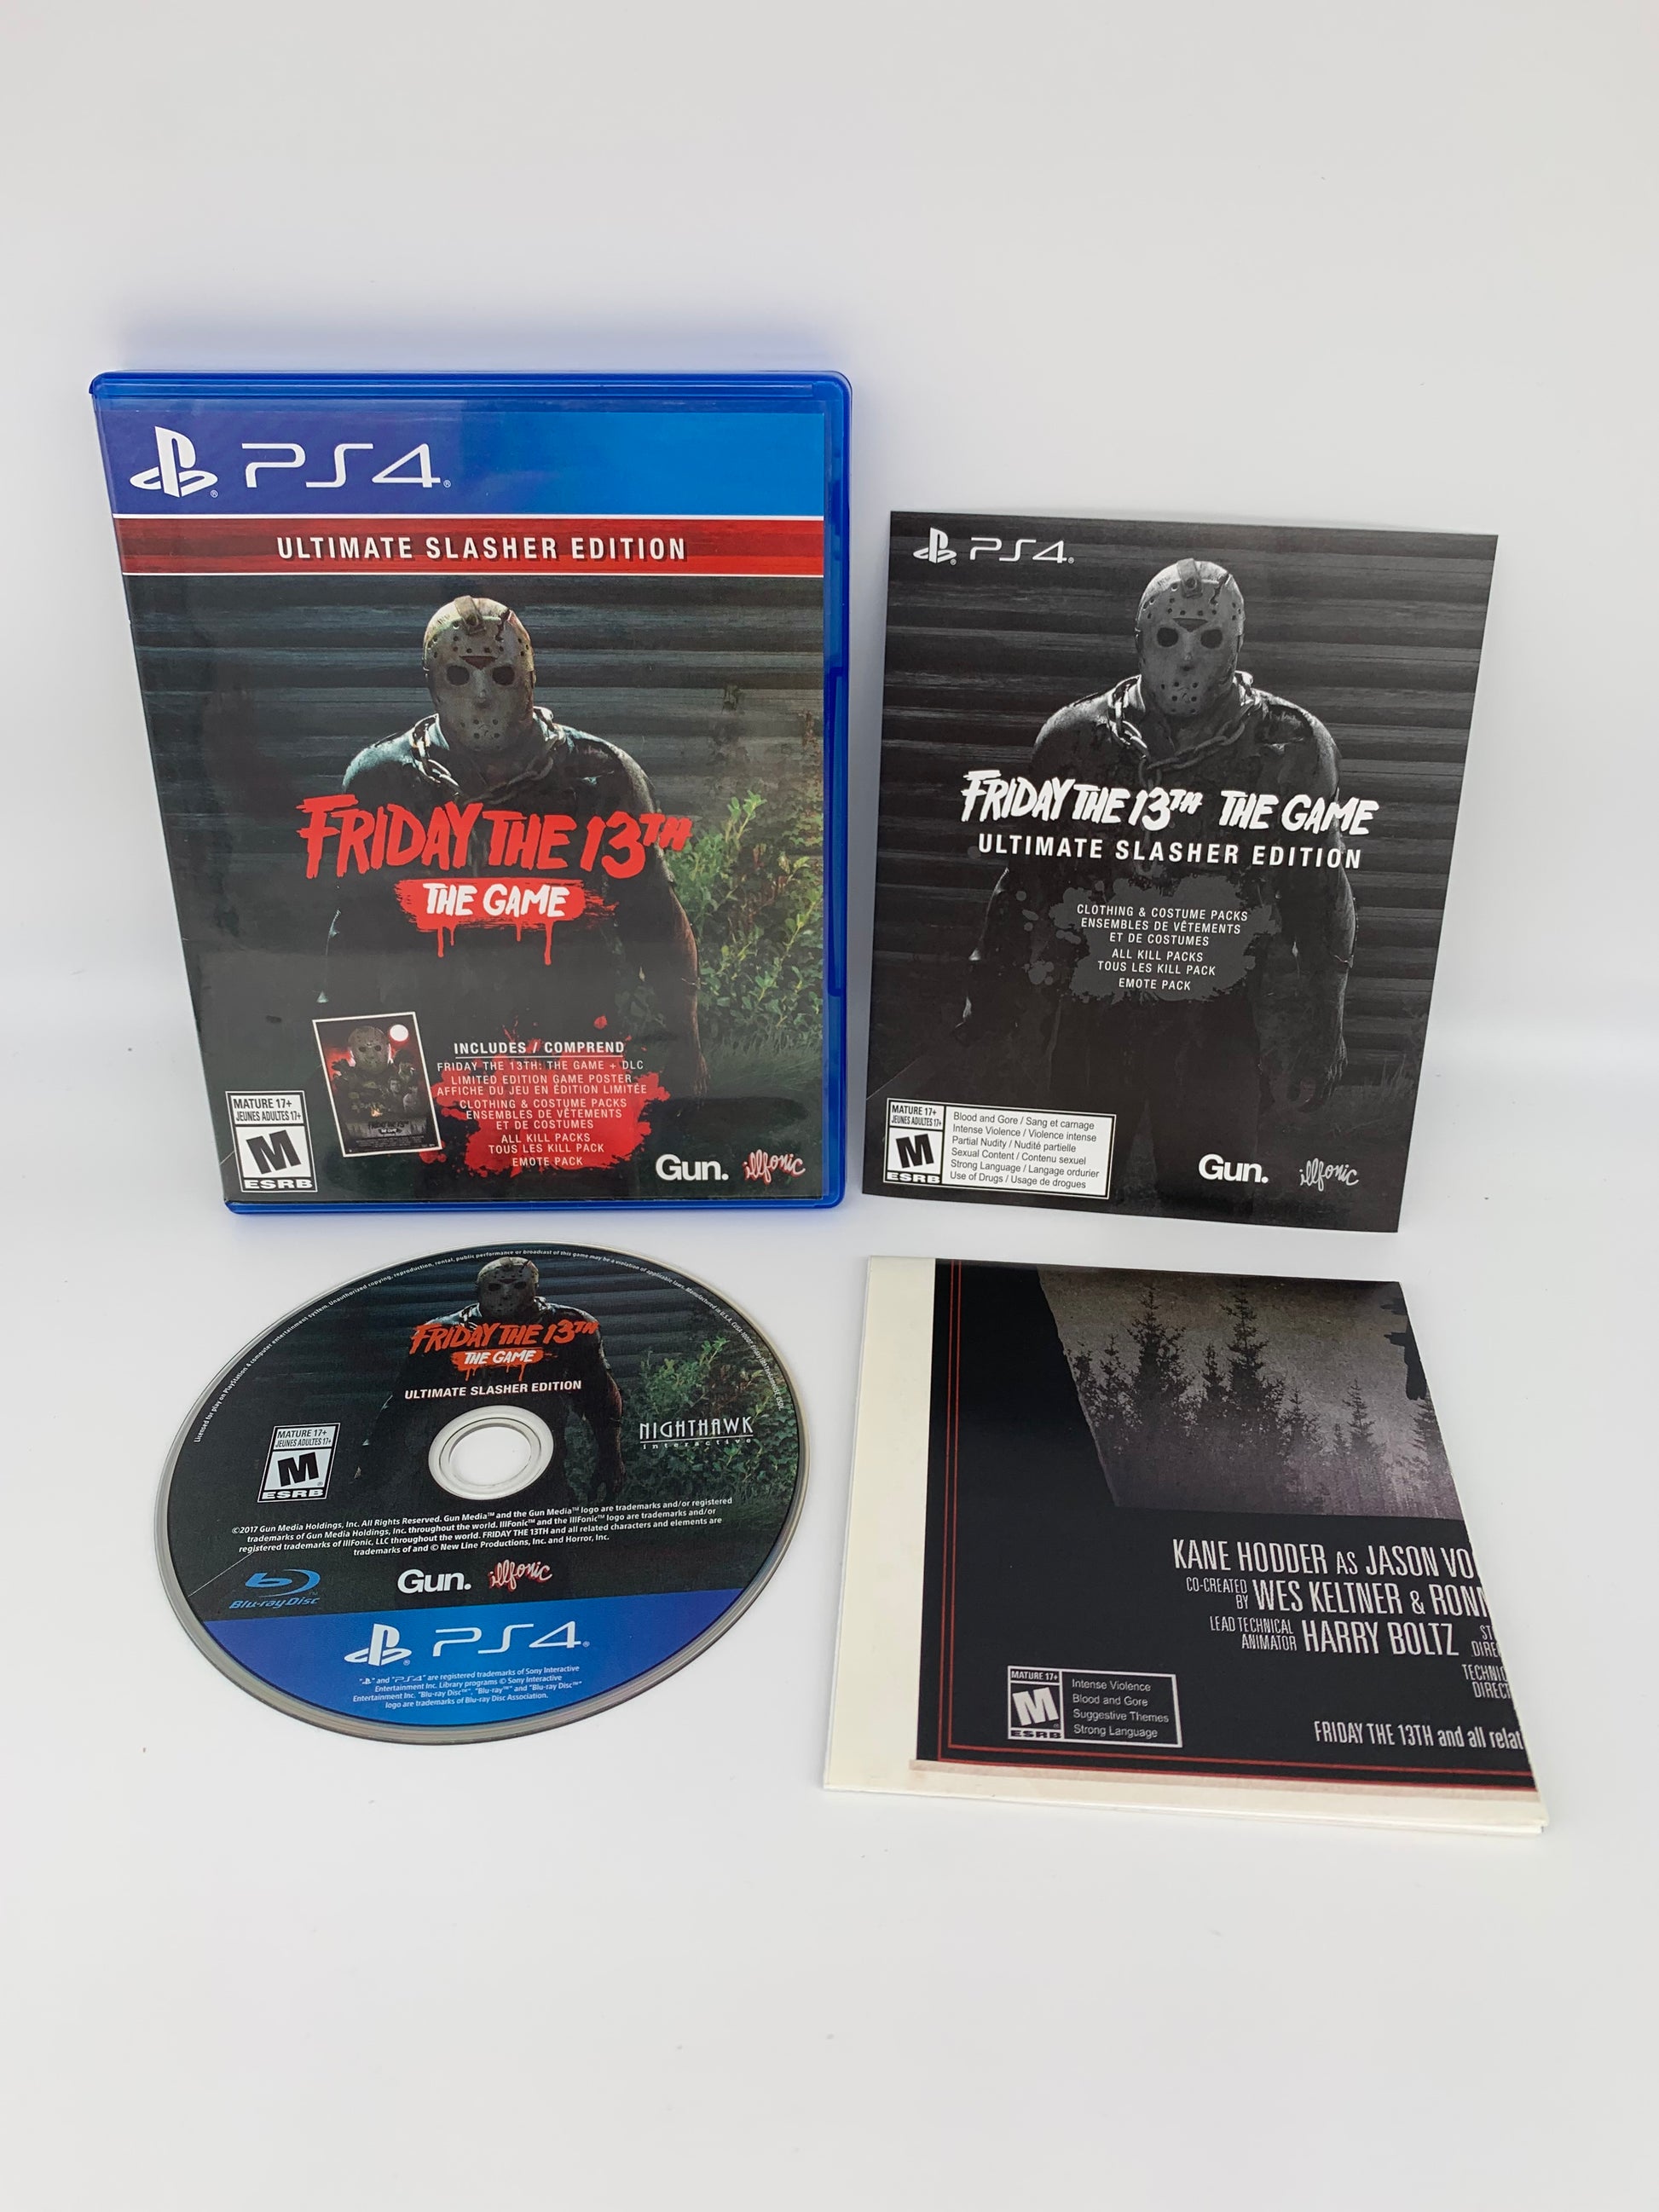 PiXEL-RETRO.COM : SONY PLAYSTATION 4 (PS4) COMPLETE CIB BOX MANUAL GAME NTSC FRIDAY THE 13TH THE GAME ULTIMATE SLASHER EDITION